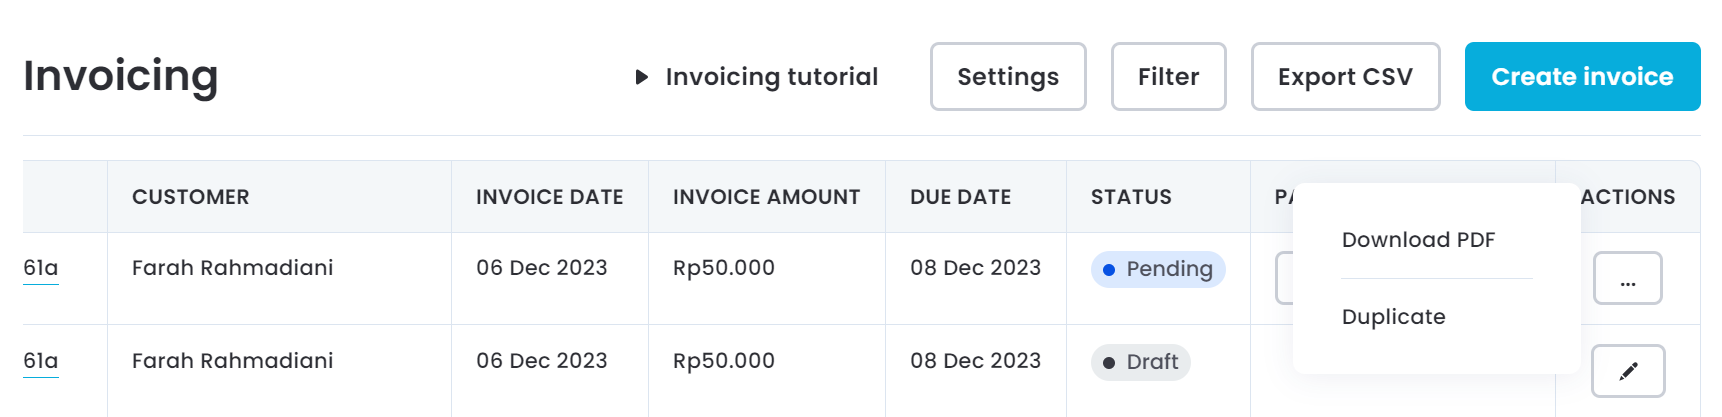 Duplicate an invoice